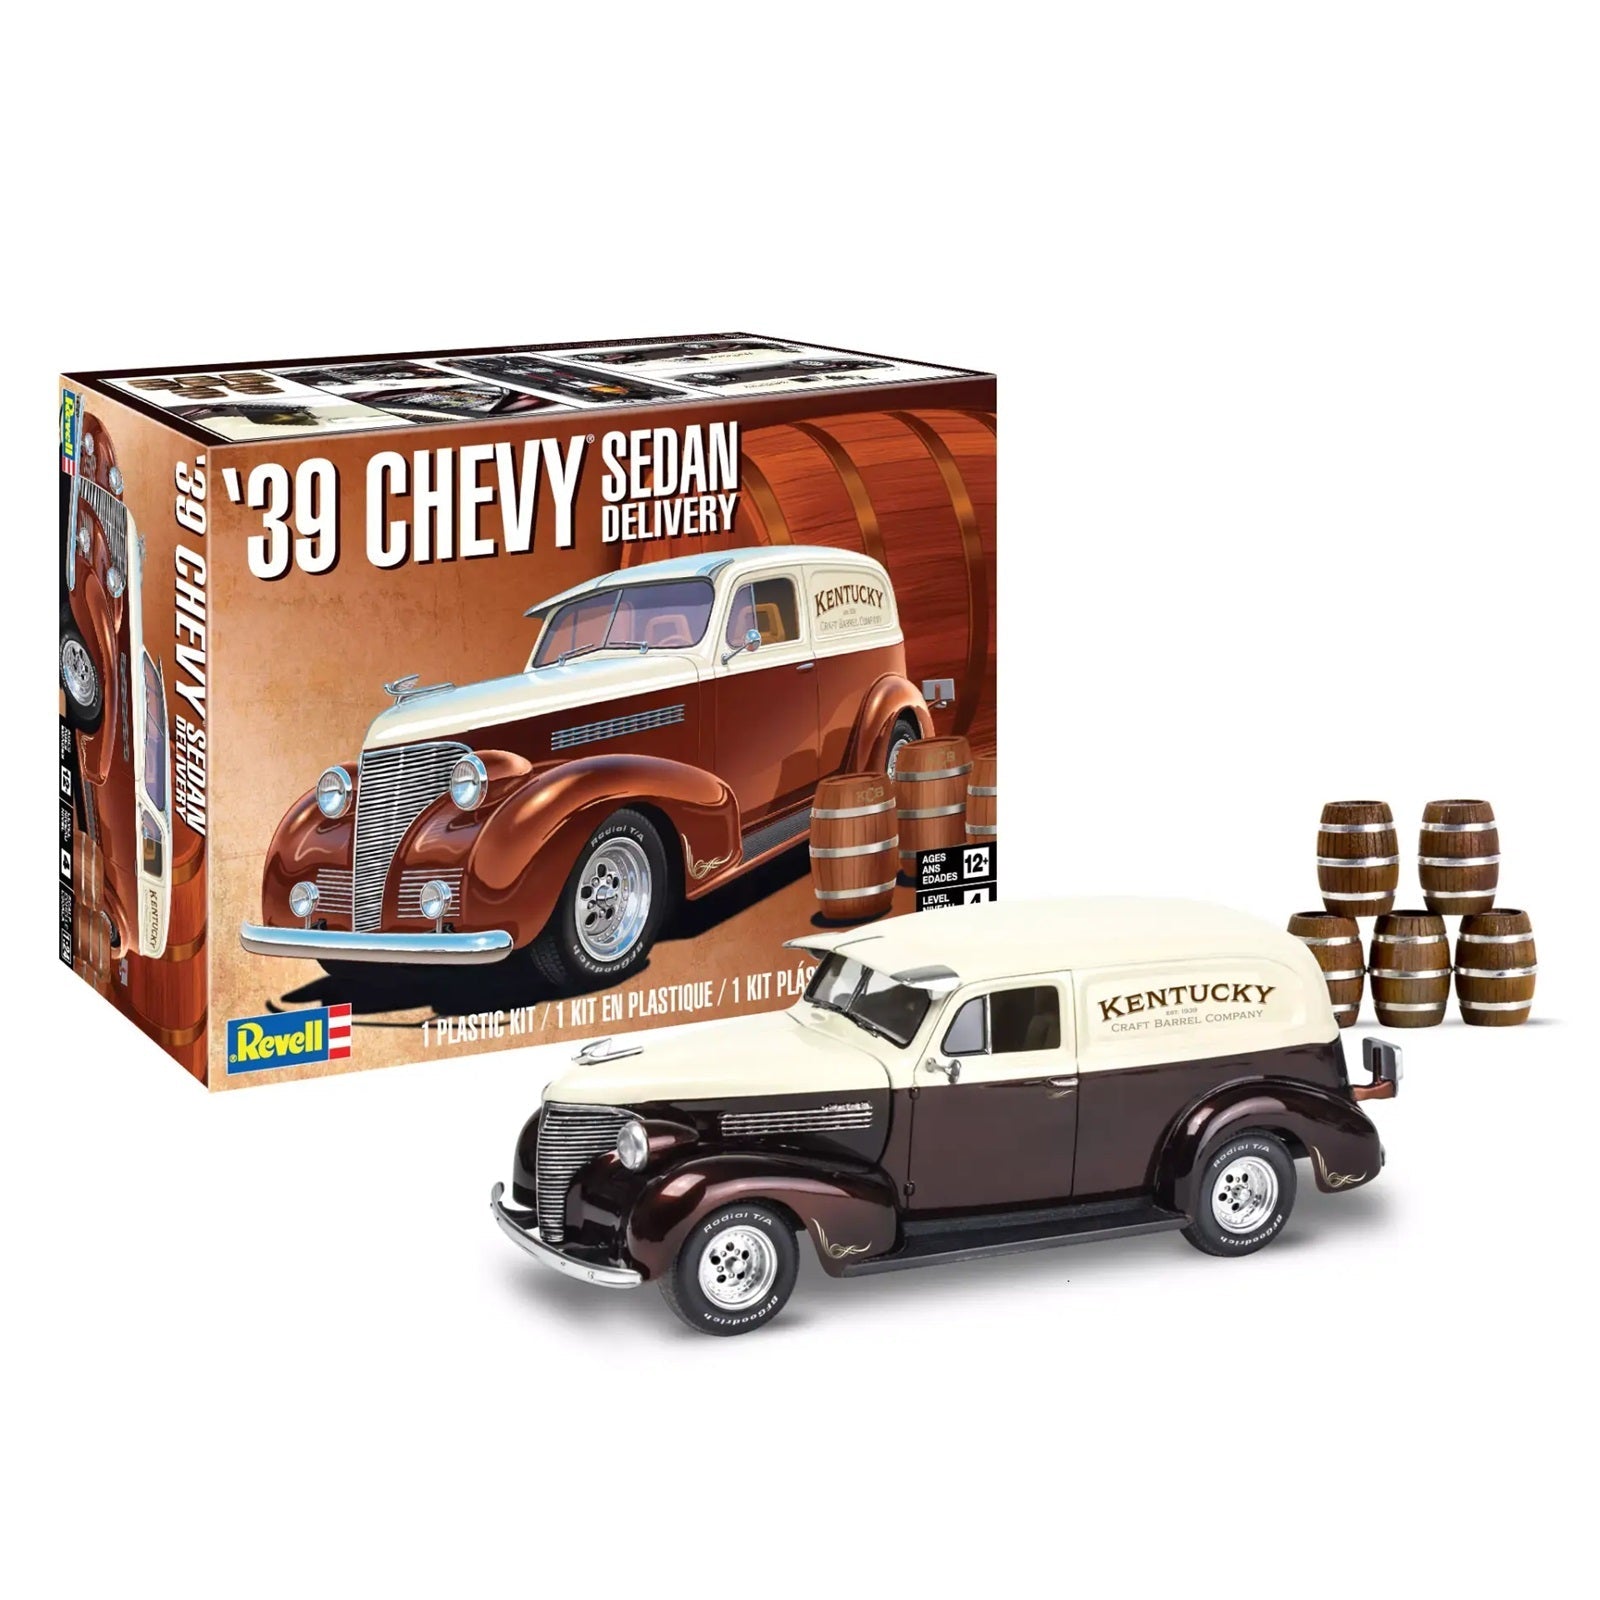 Revell '39 Chevy Sedan Delivery Plastic Model Kit, 1/24 Scale - Micro - Mark Scale Model Kits